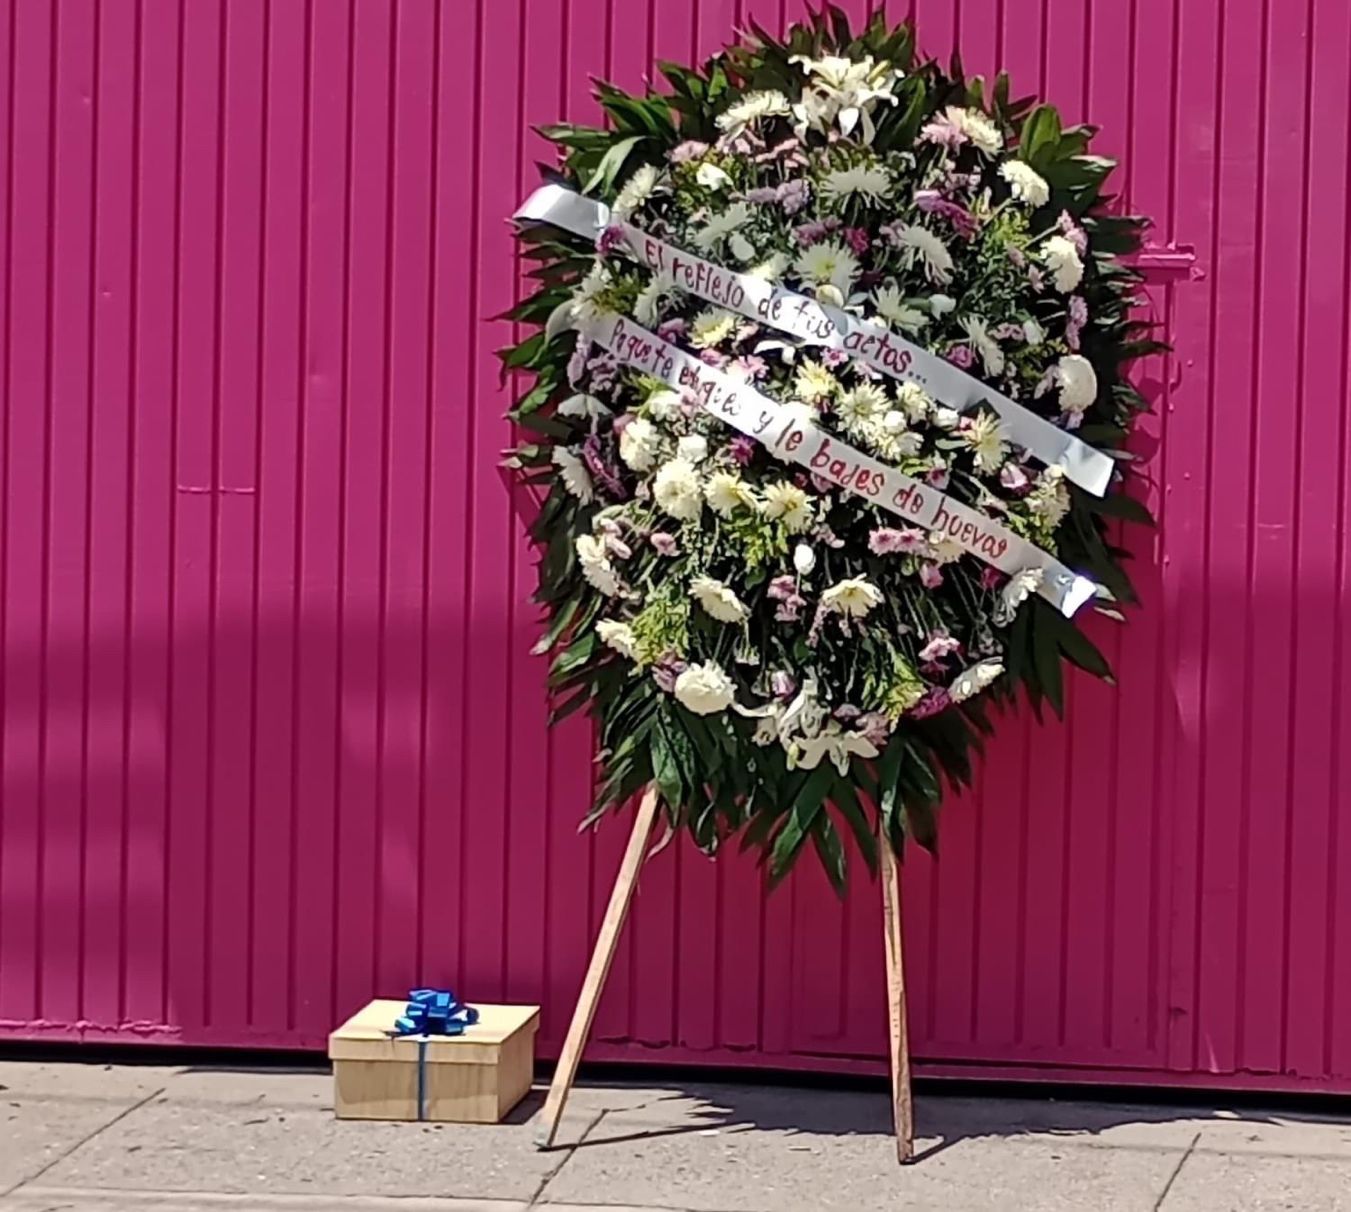 Funeral Wreath with a Narco-Message and a Gift Box Containing Human Genitals Discovered Outside a Flower Shop, Los Mochis, Sinaloa - 17 July 2023